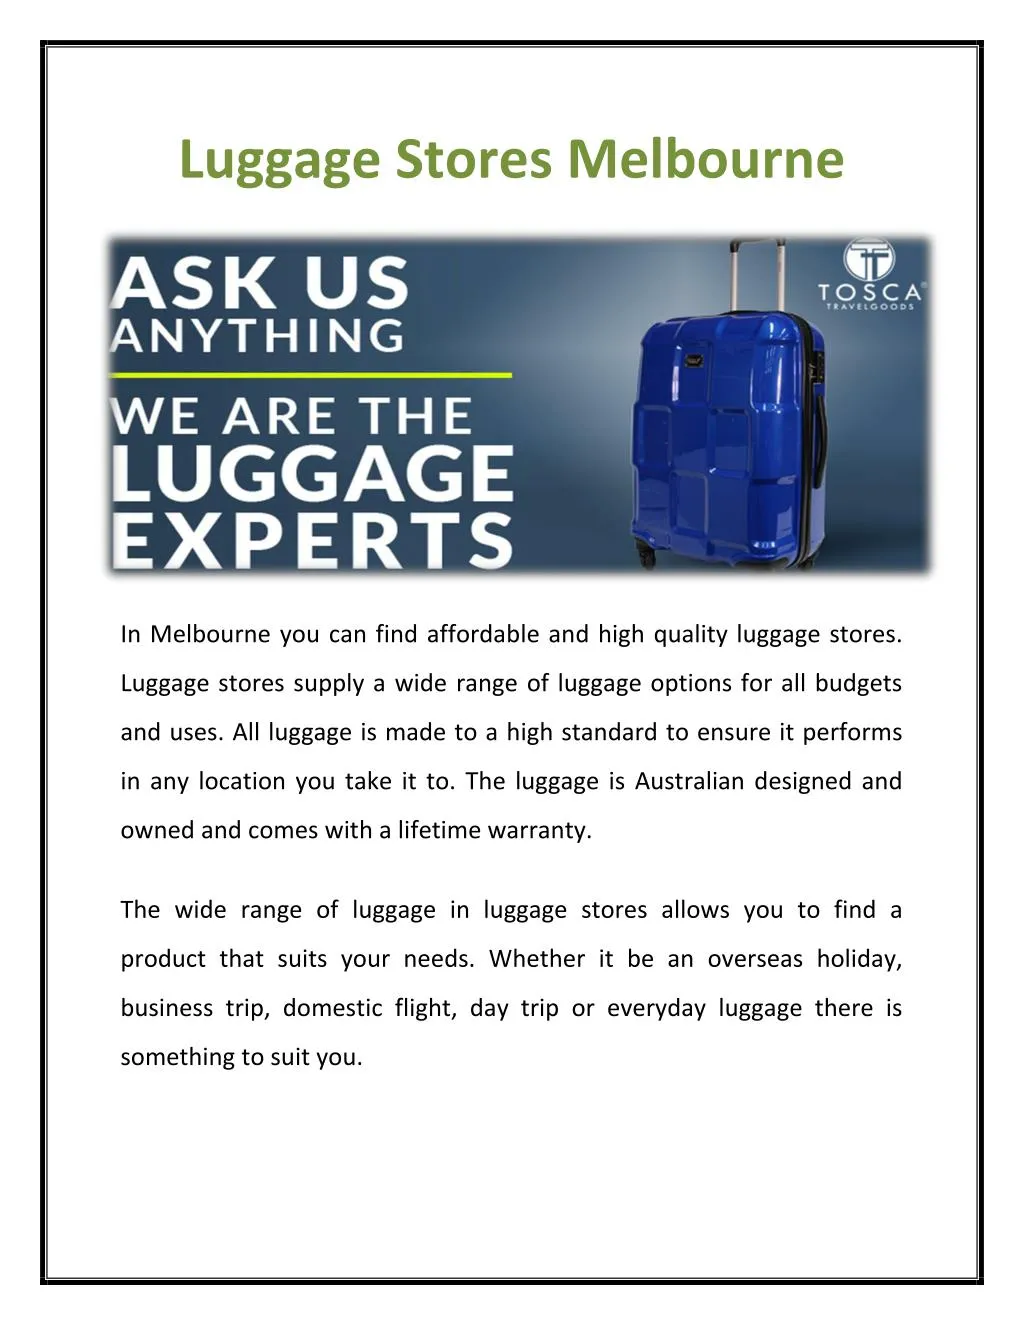 luggage stores melbourne